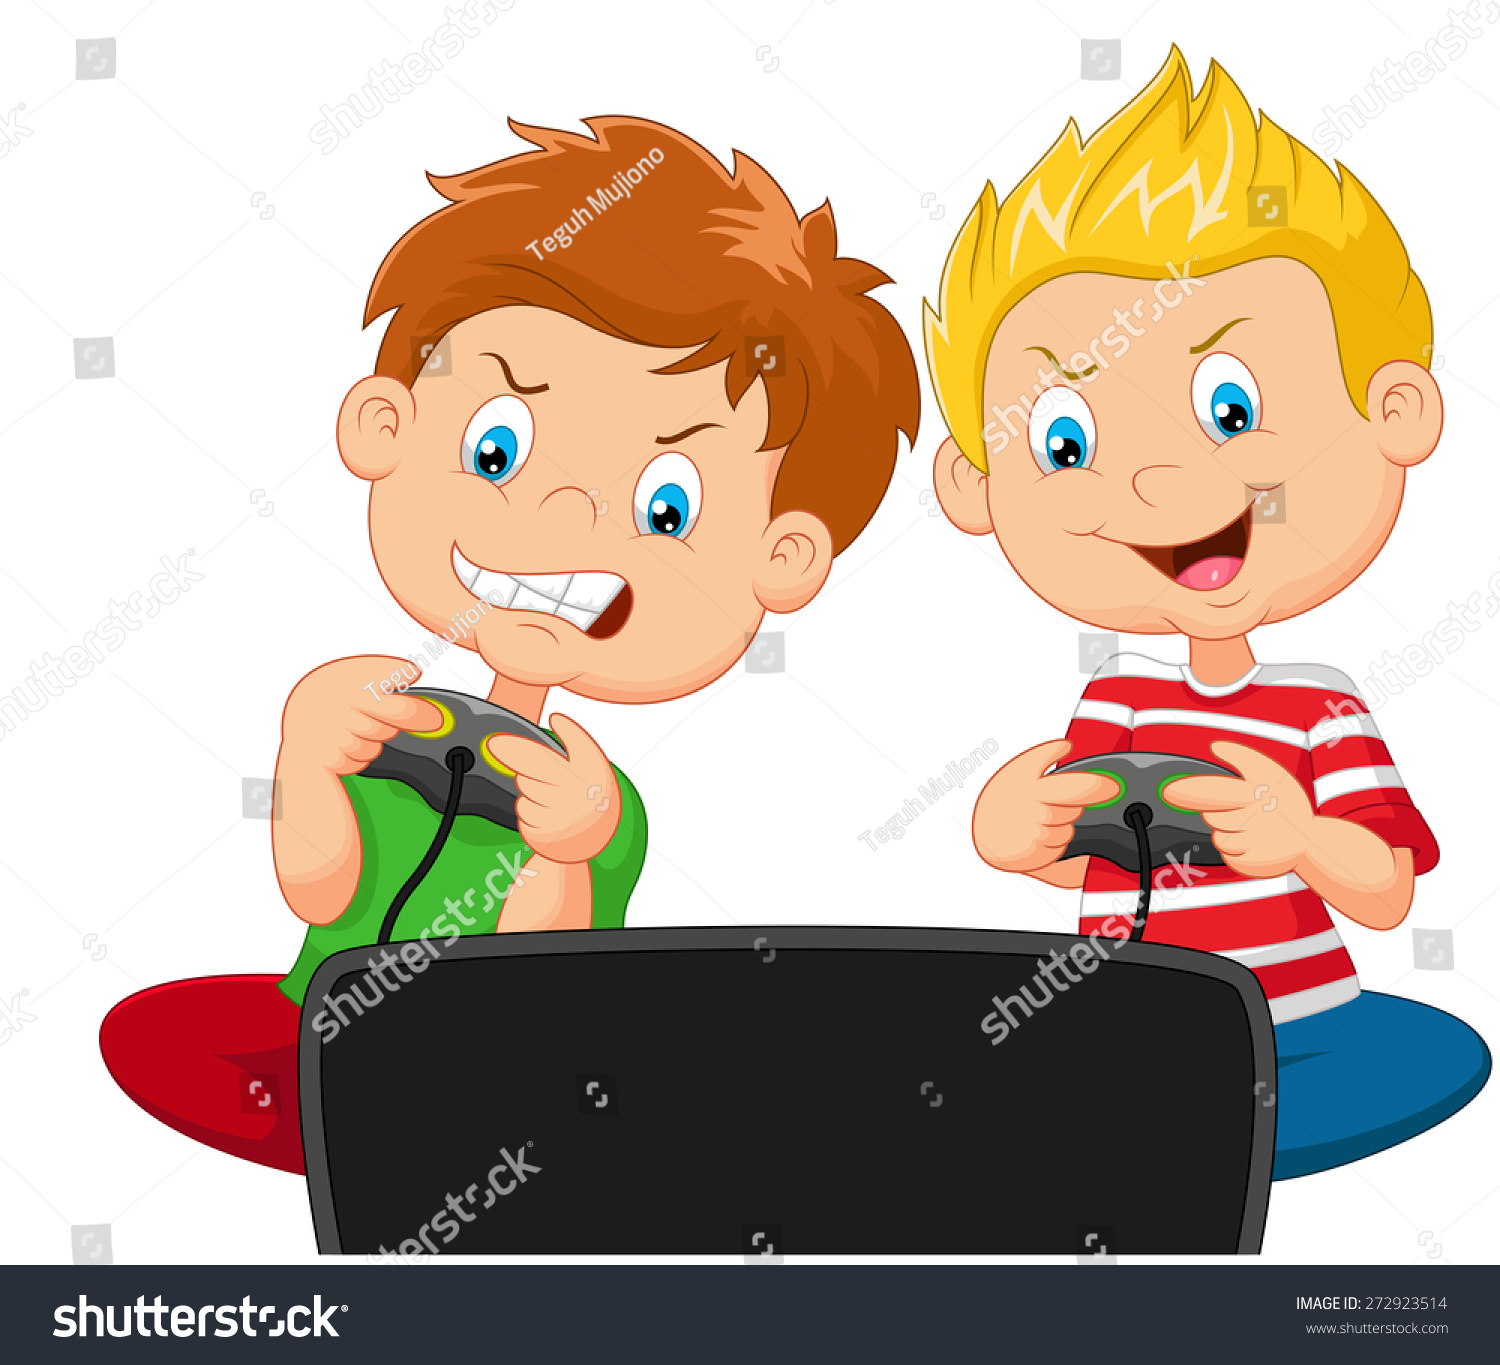 free clipart video games - photo #31